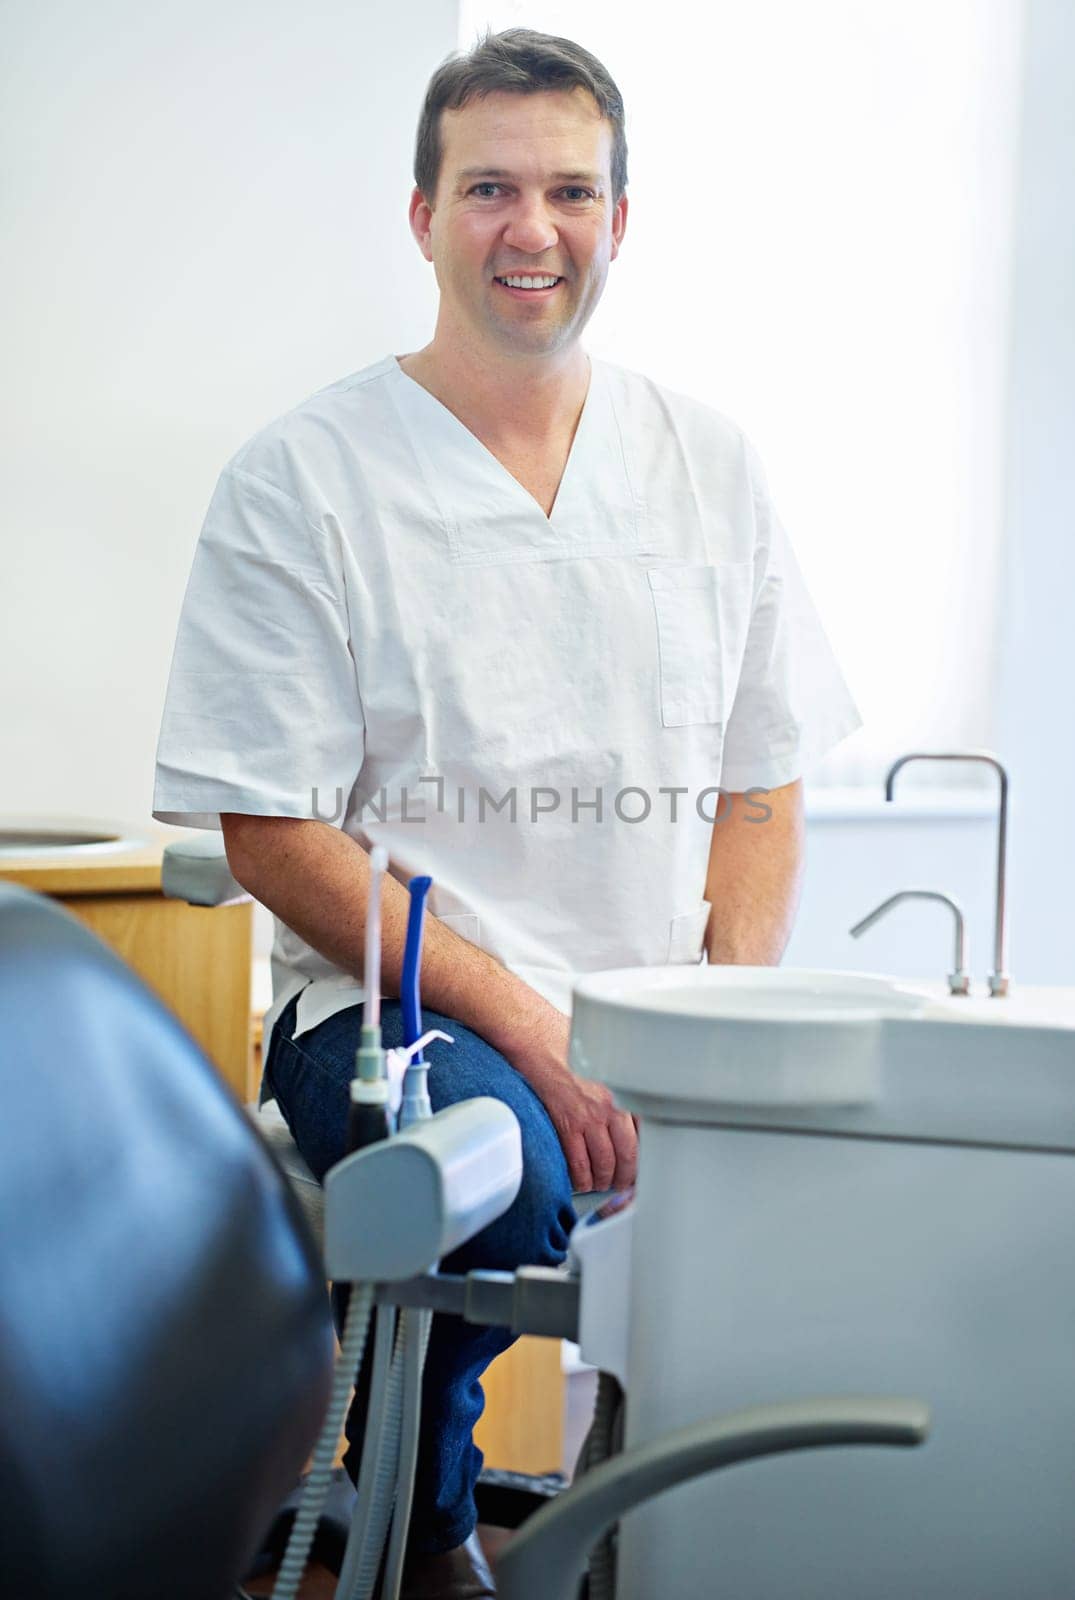 Your friendly dentist. Portrait of a male dentist sitting by the dental equipment in his office